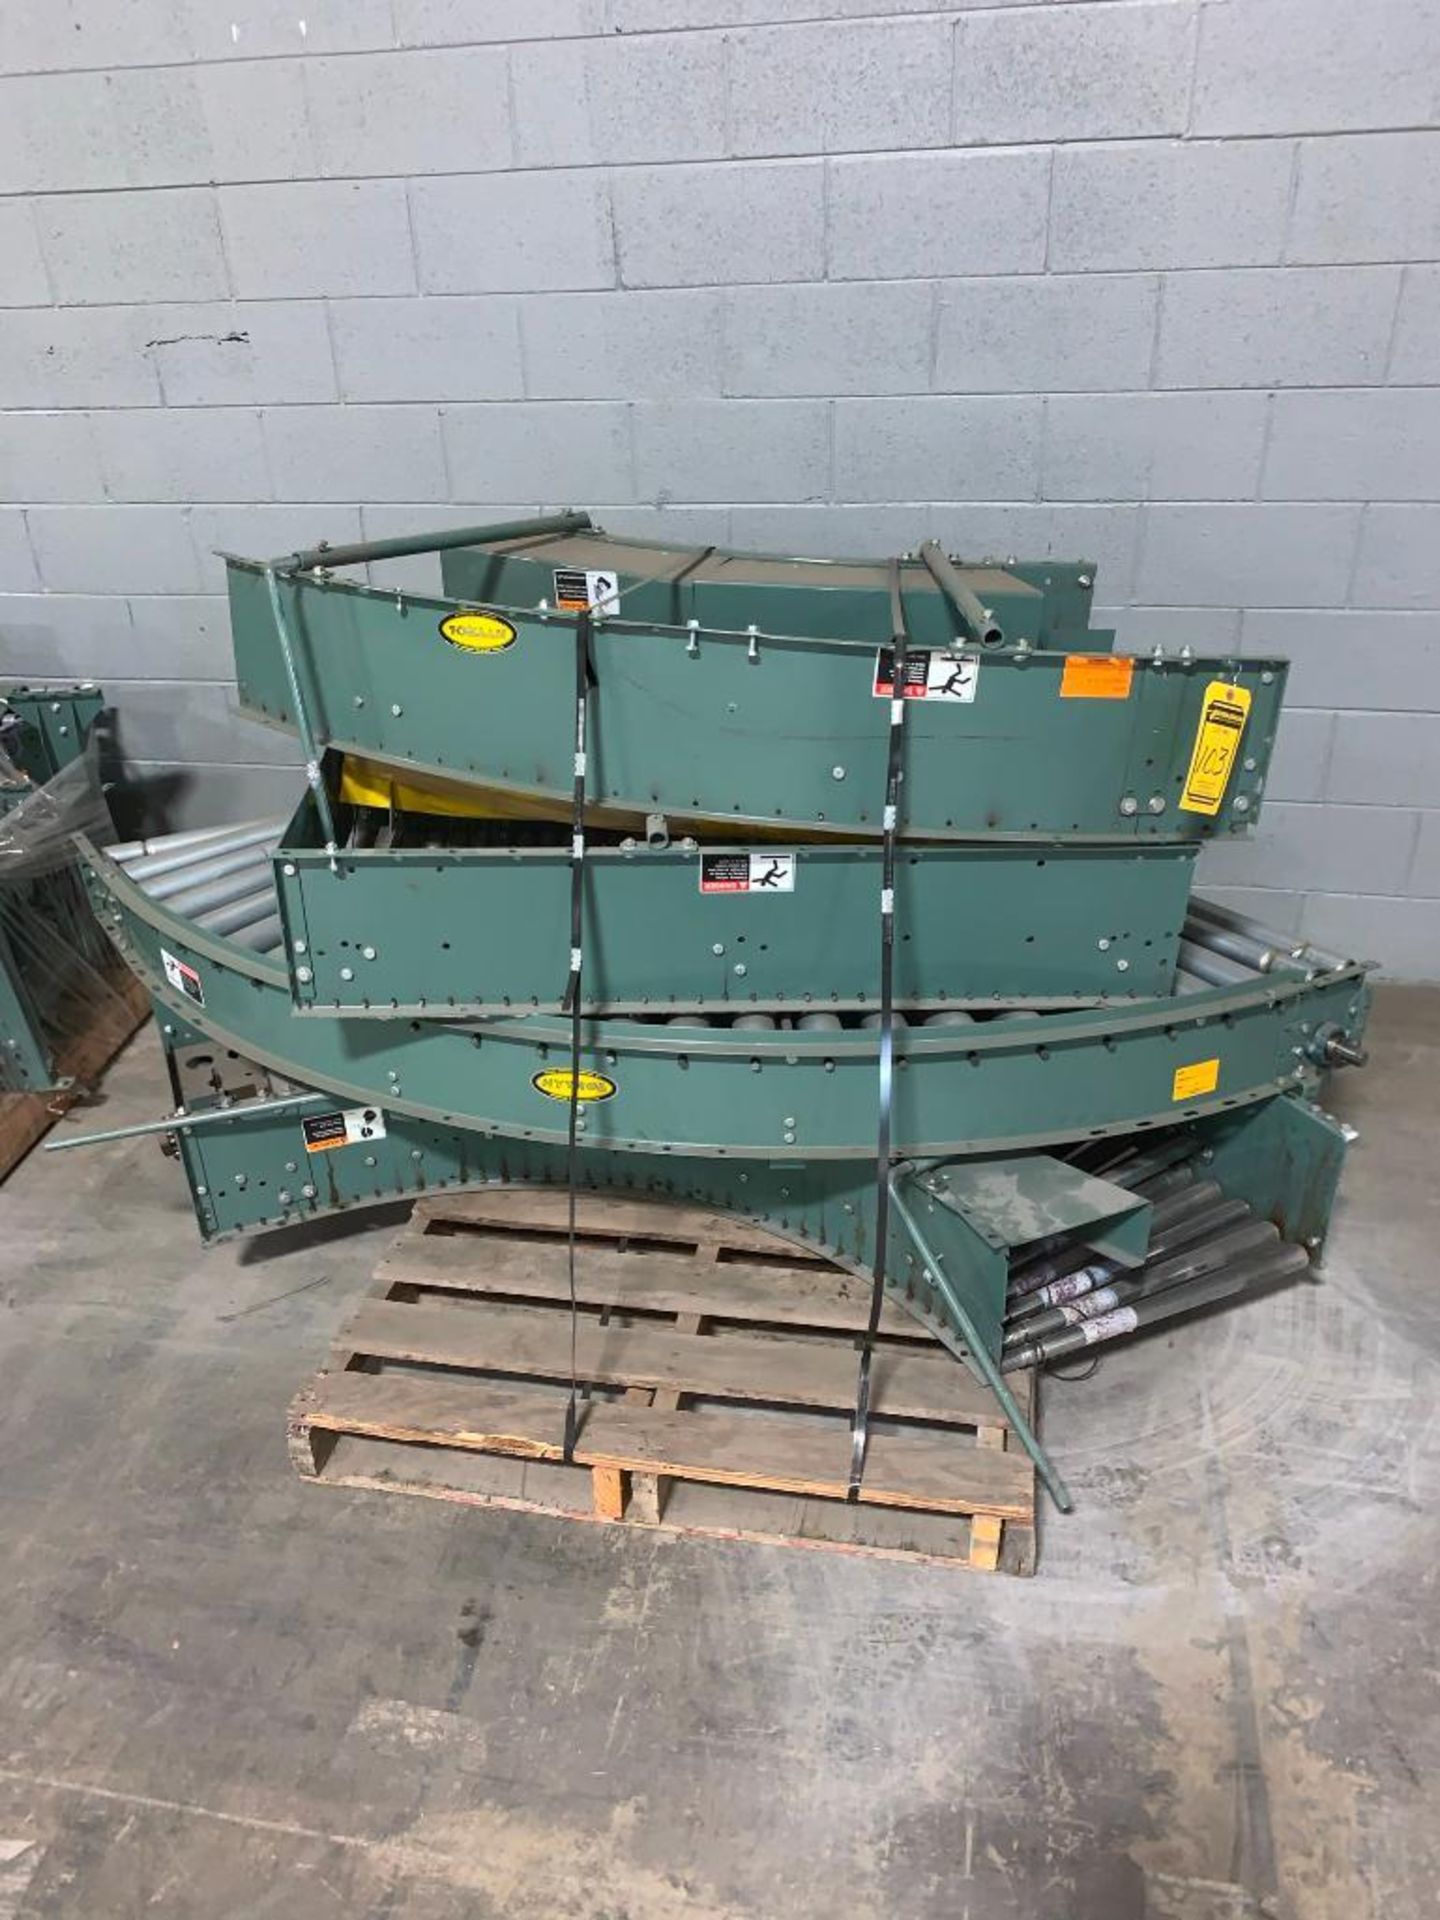 HYTROL CONVEYOR CO. POWERED CONVEYOR, APPROX. 300 LINEAL FEET, 22'' X 10' SECTIONS, INCLUDES CURVED - Image 18 of 22